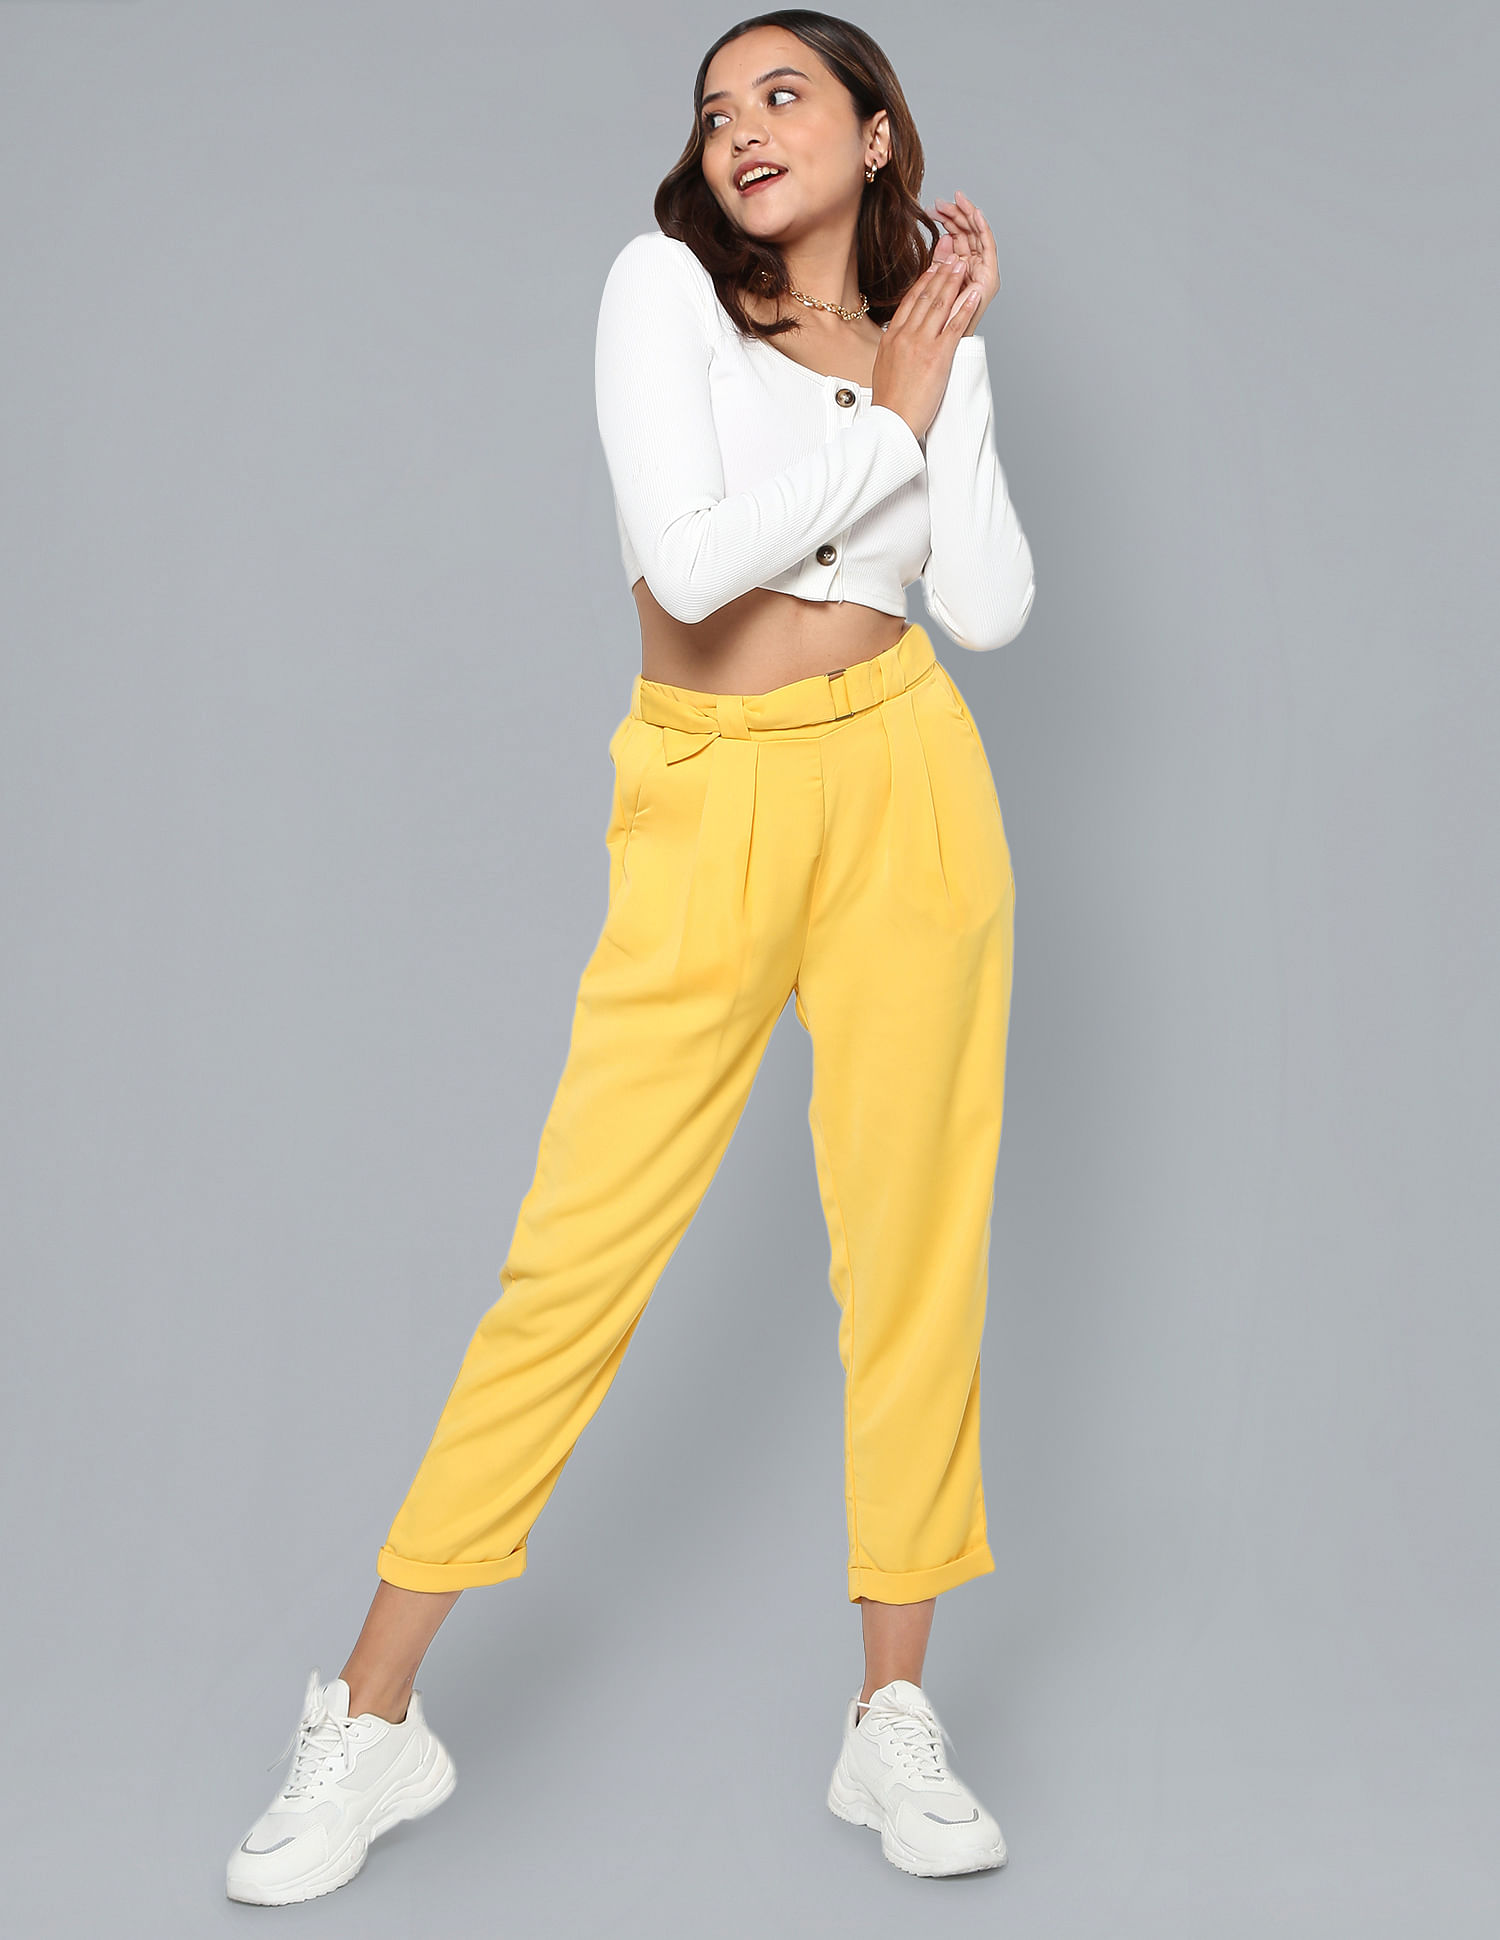 mustard yellow culotte pants\lace up heels\white button down crop  top\circle bag | Fashion, Spring outfits casual, Blogger outfits